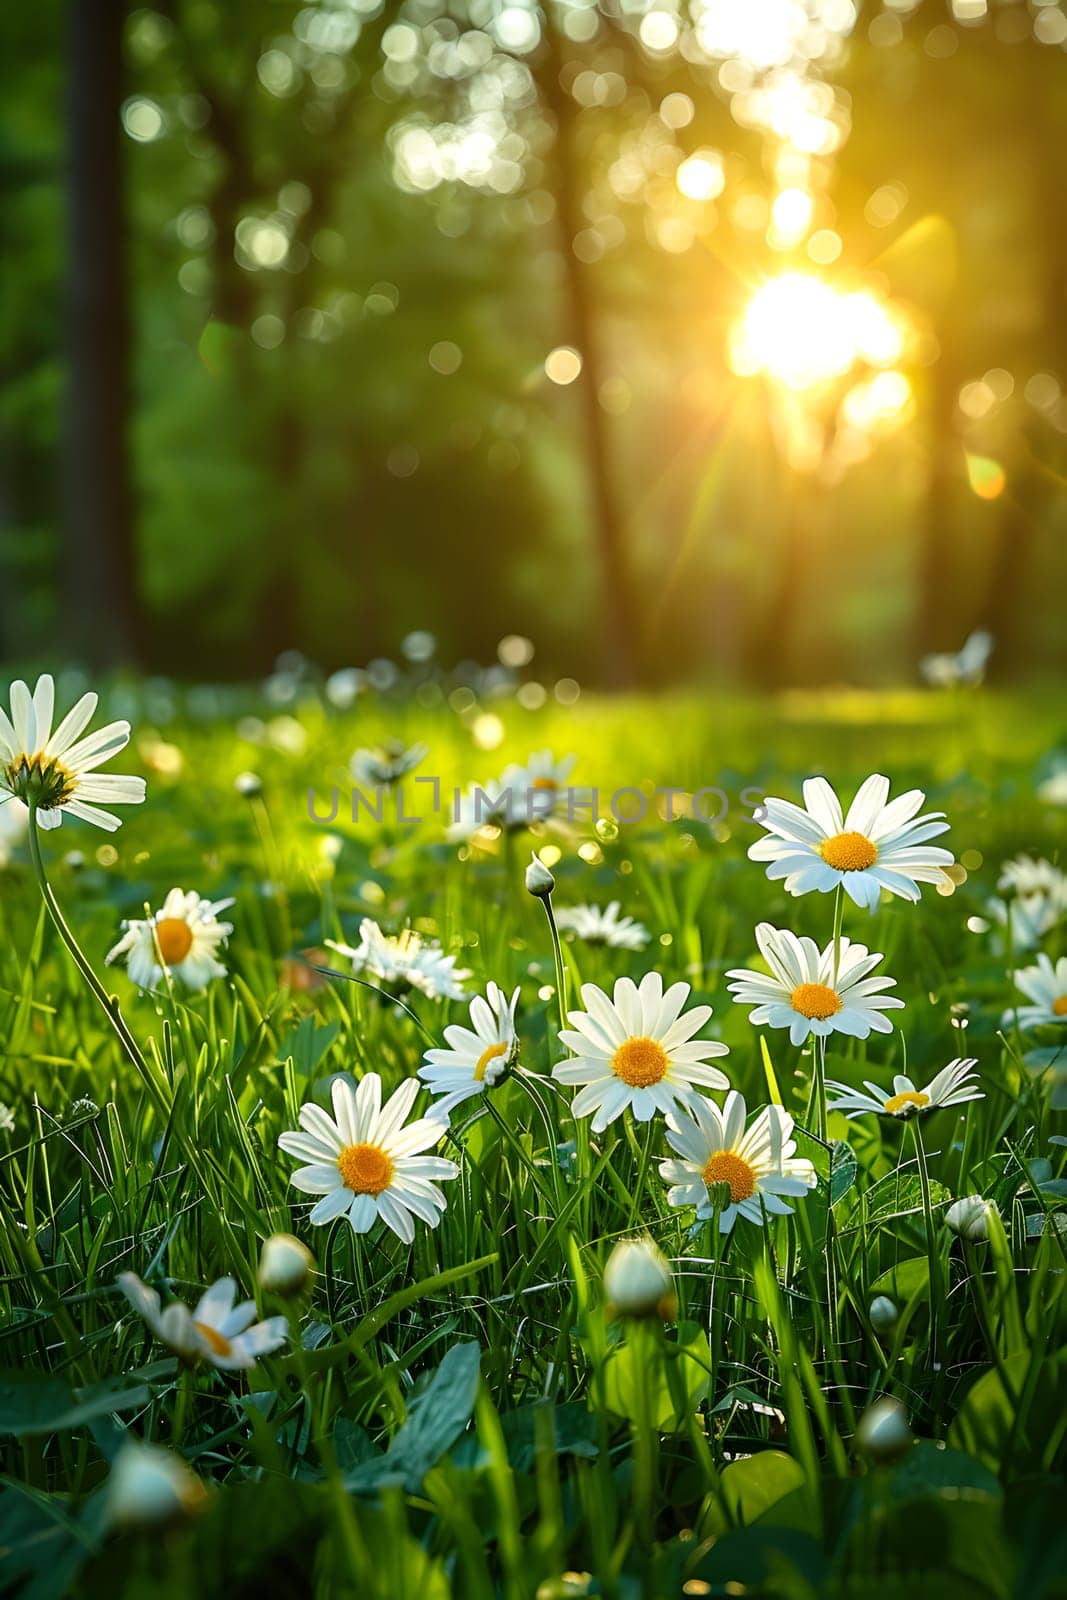 Scenic view of a lush daisy meadow bathed in sunlight with vivid colors and space for copy. Depicts summer vibrancy, serenity, and natural beauty.